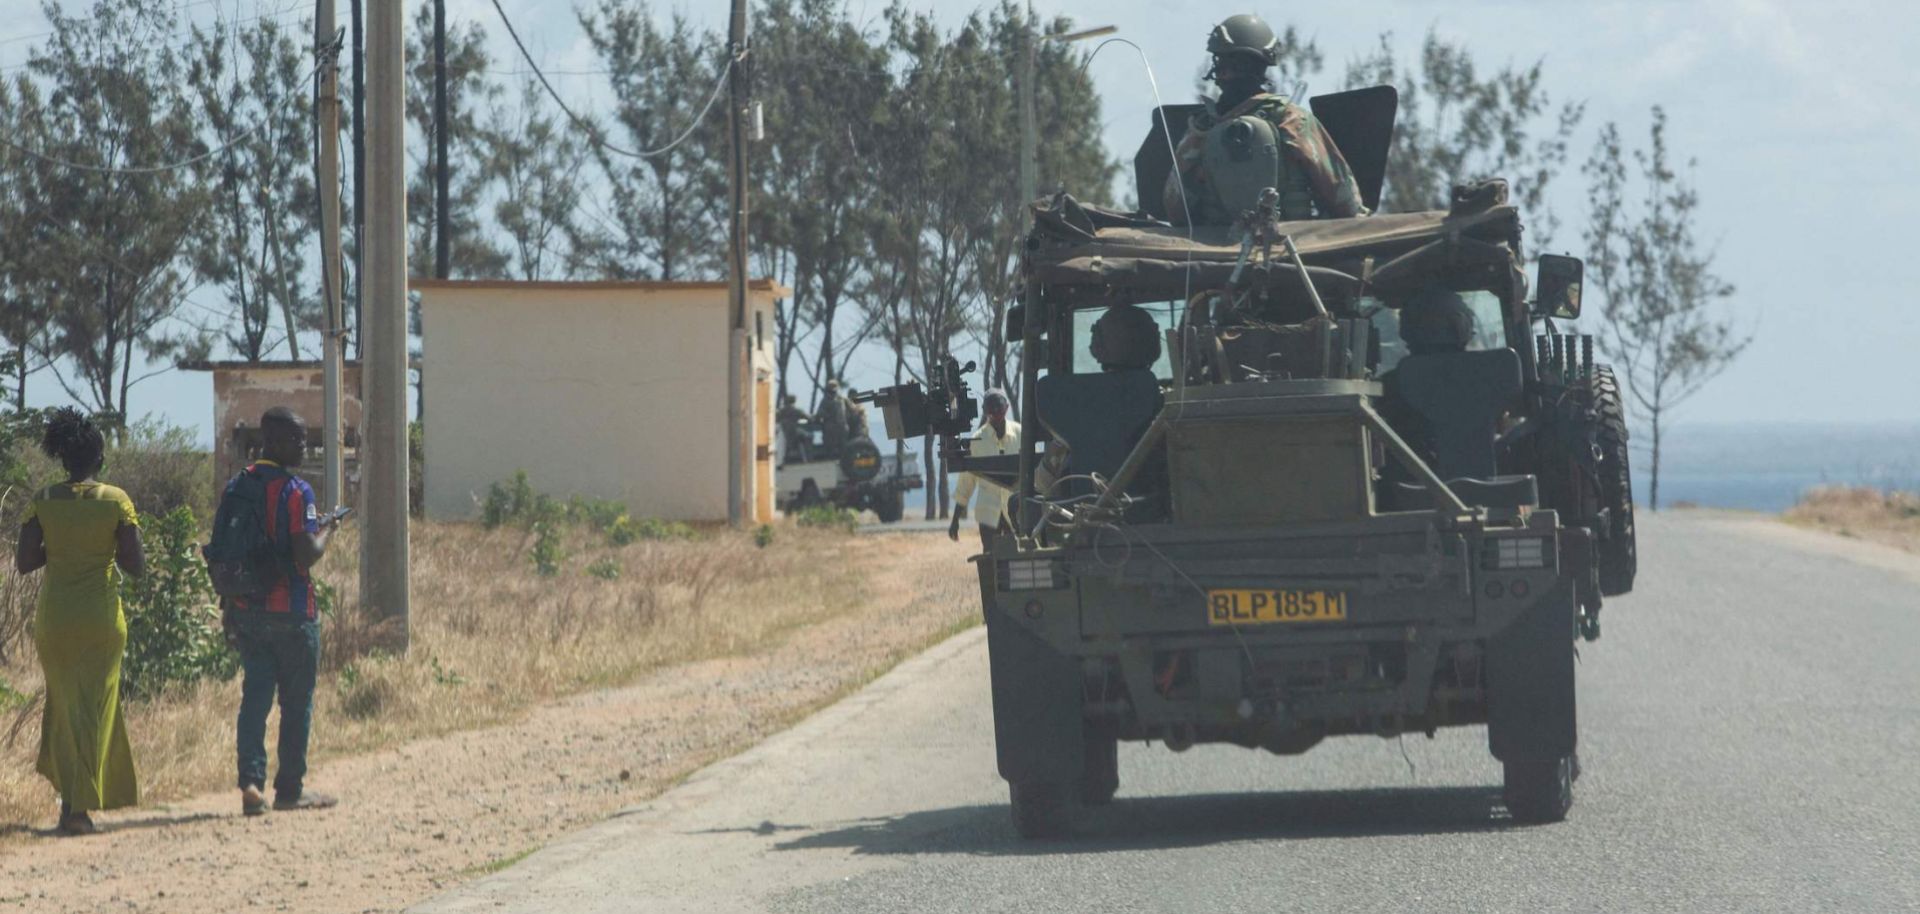 A military convoy from a multinational intervention force on Aug. 5, 2021, in Pemba, Mozambique.